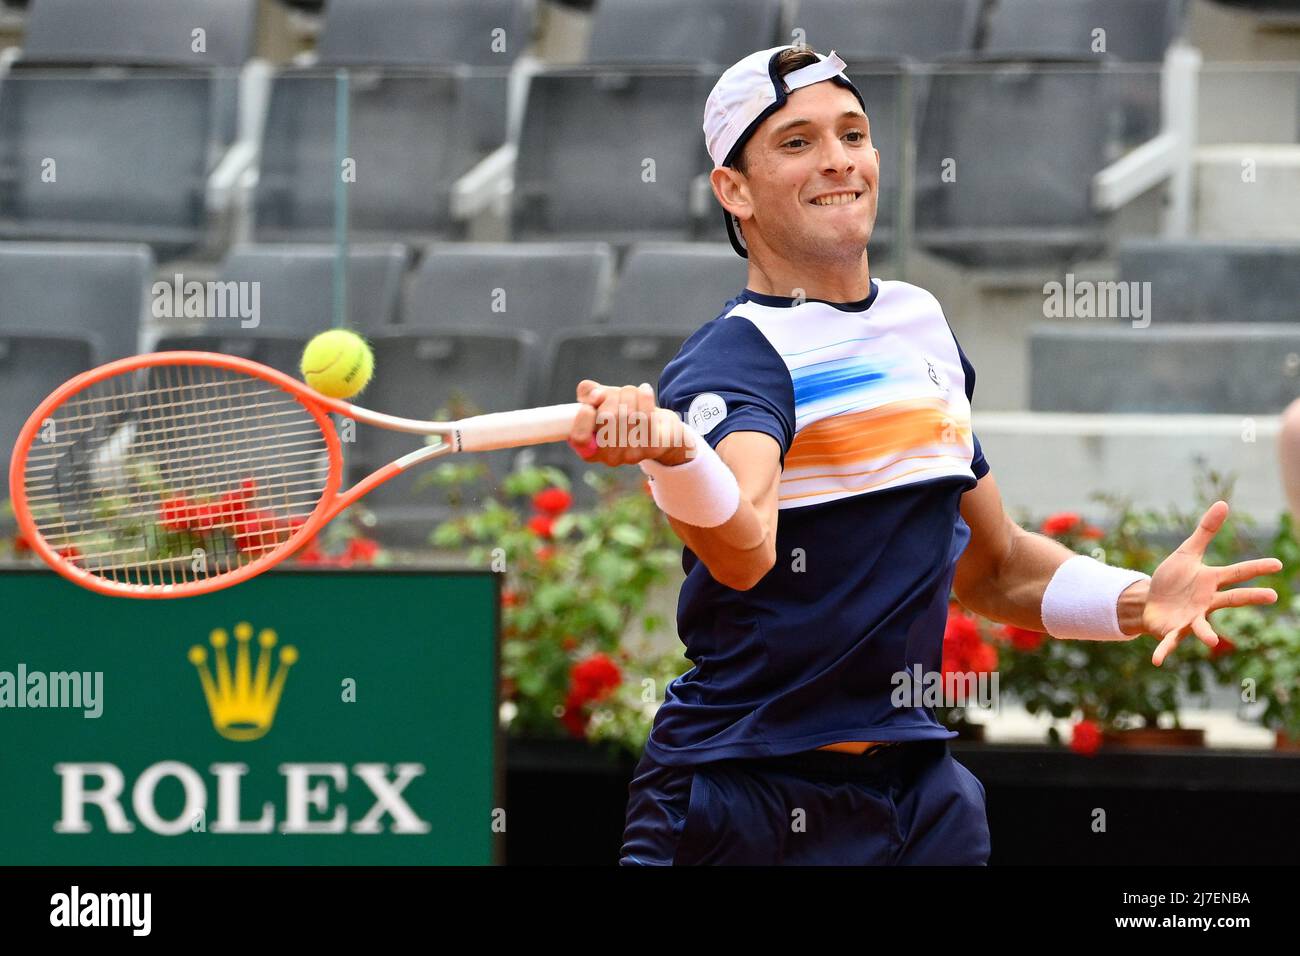 Rome, Italy: May 8, 2022,Francesco Passaro (ITA) during the first round  against Cristian Grain (CHI) of the ATP Master 1000 Internazionali BNL  D'Italia tournament at Foro Italico on May 8, 2022. (Credit